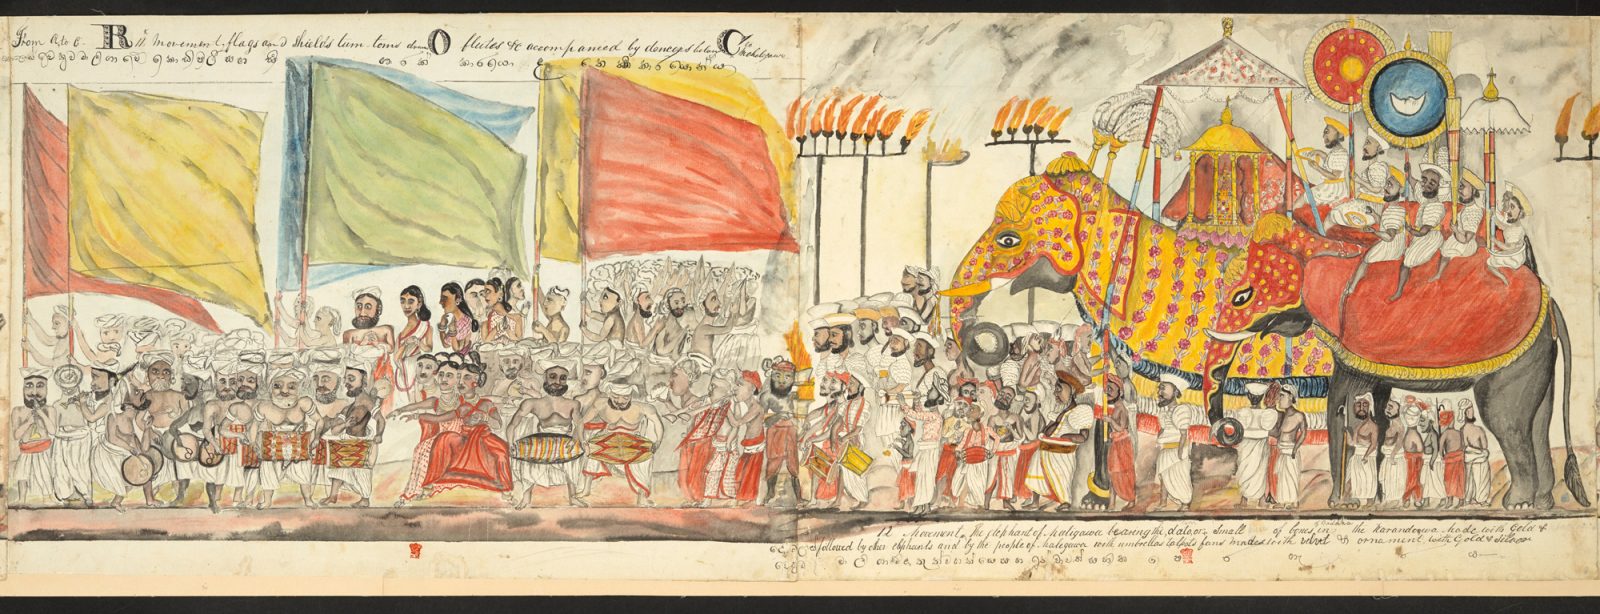 Painting of the Annual Procession of Buddha's Tooth Relic, Asala Perahera, at Kandy, Sri Lanka